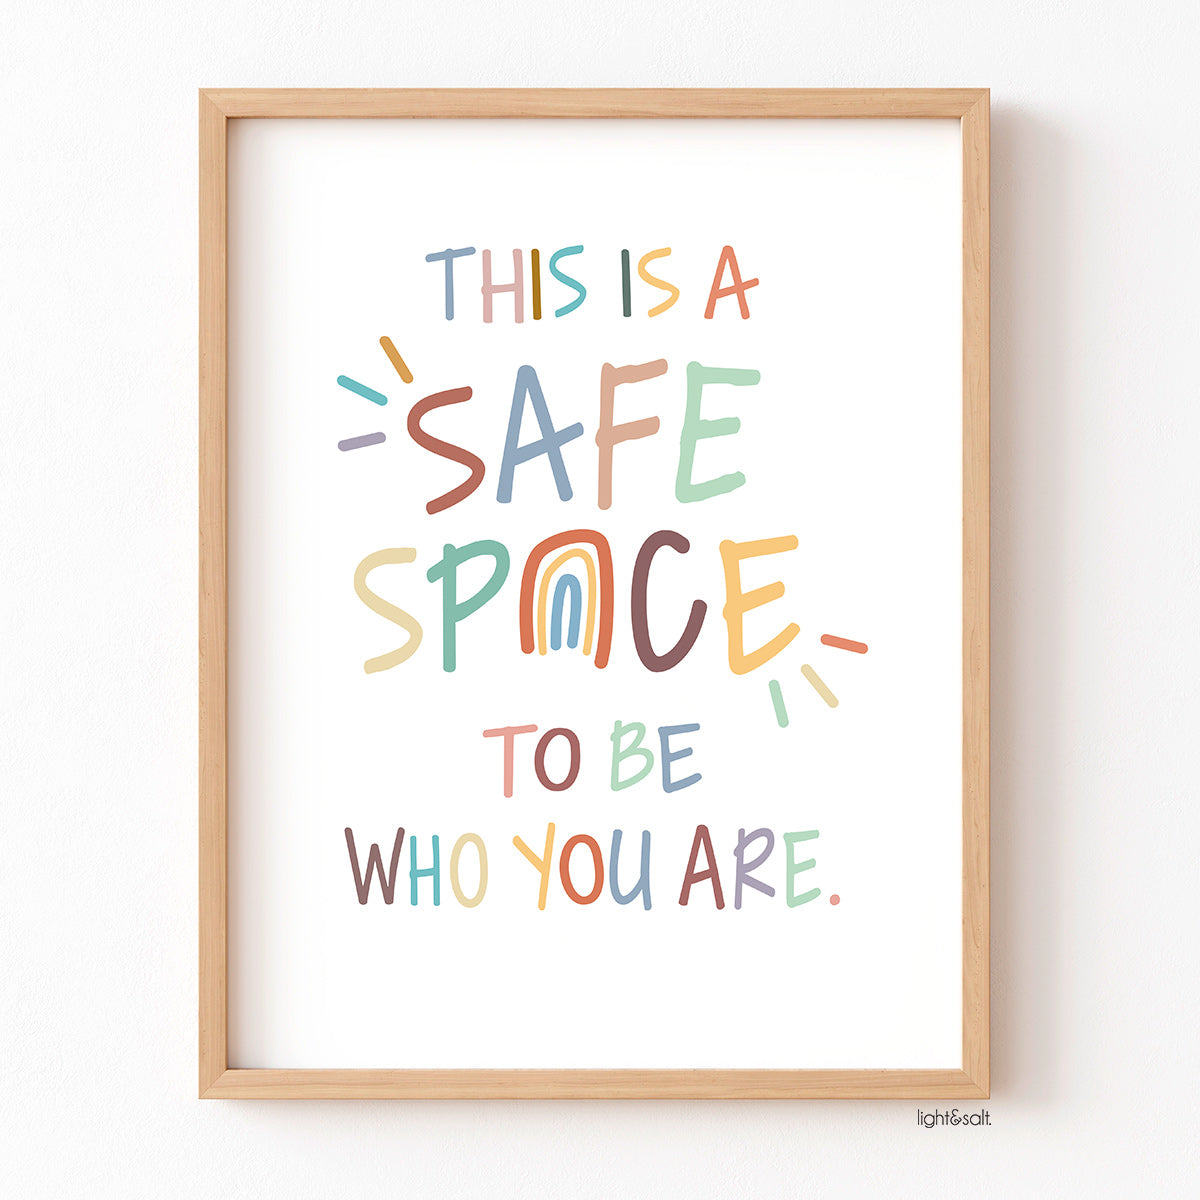 This is a safe space to be who you are poster